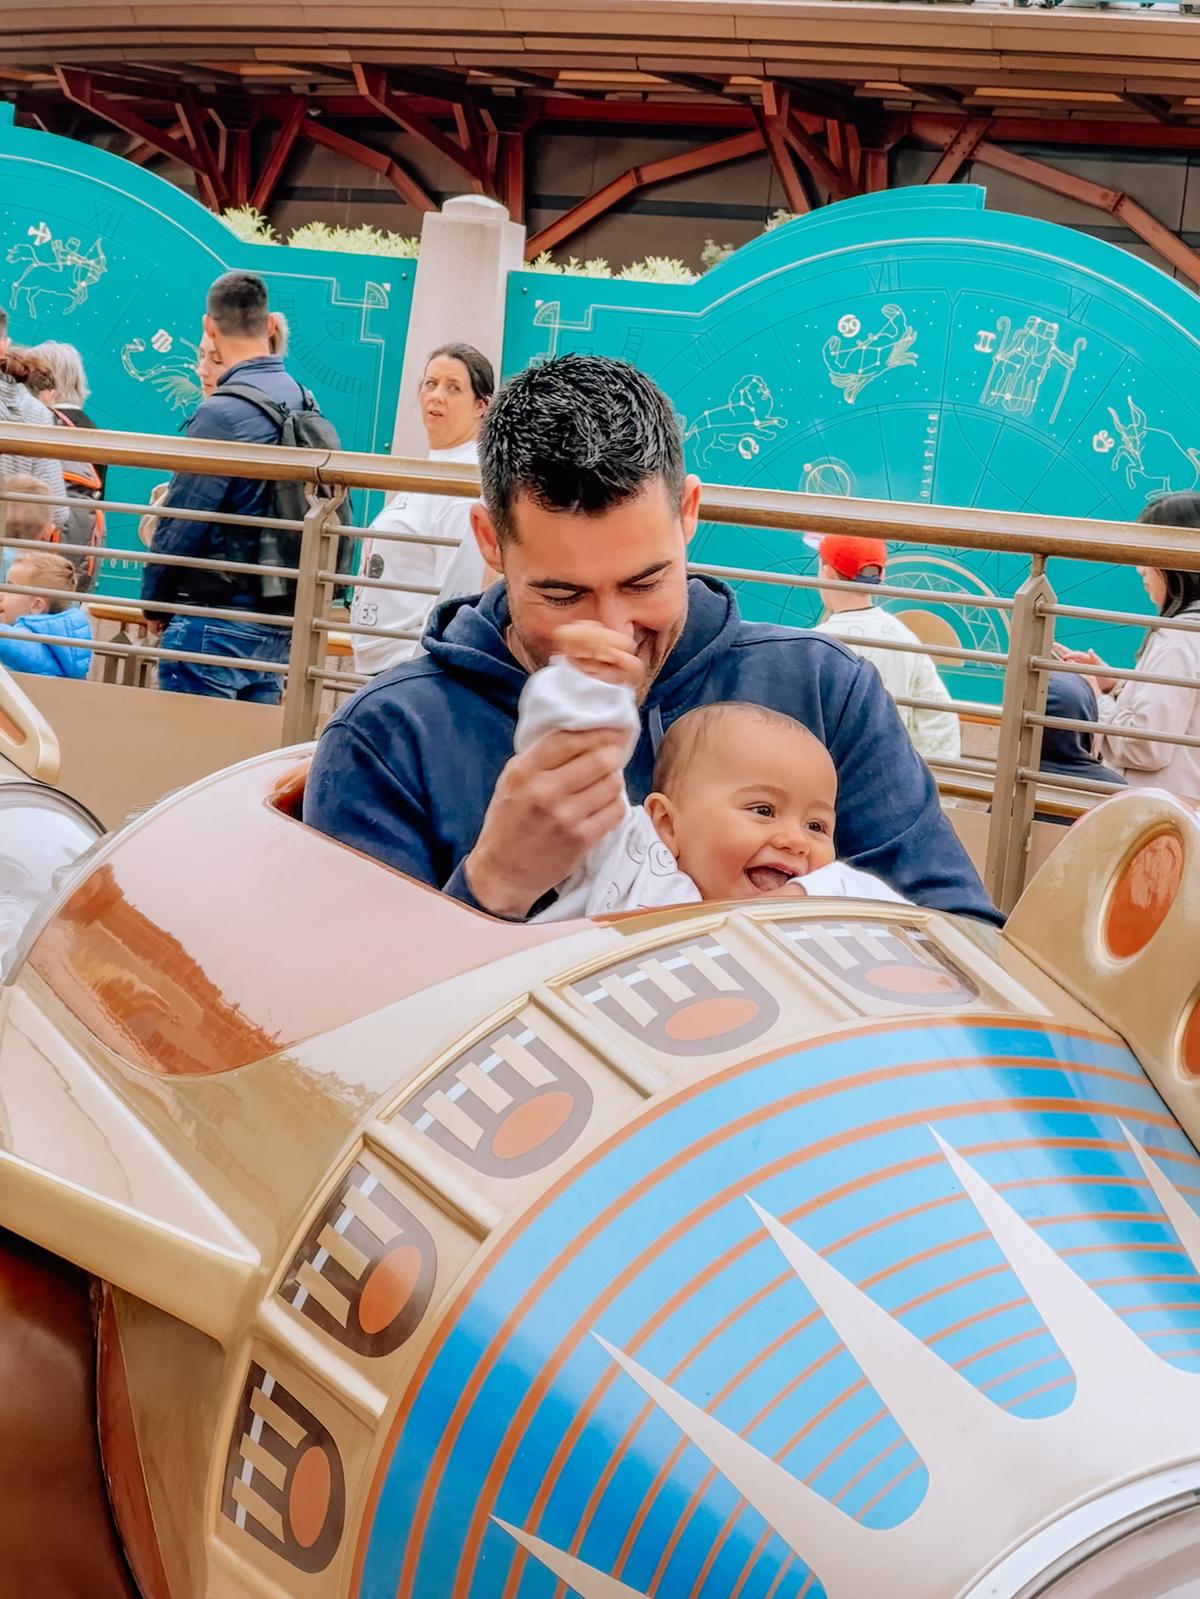 Watch: Baby in stitches during his first roller coaster ride